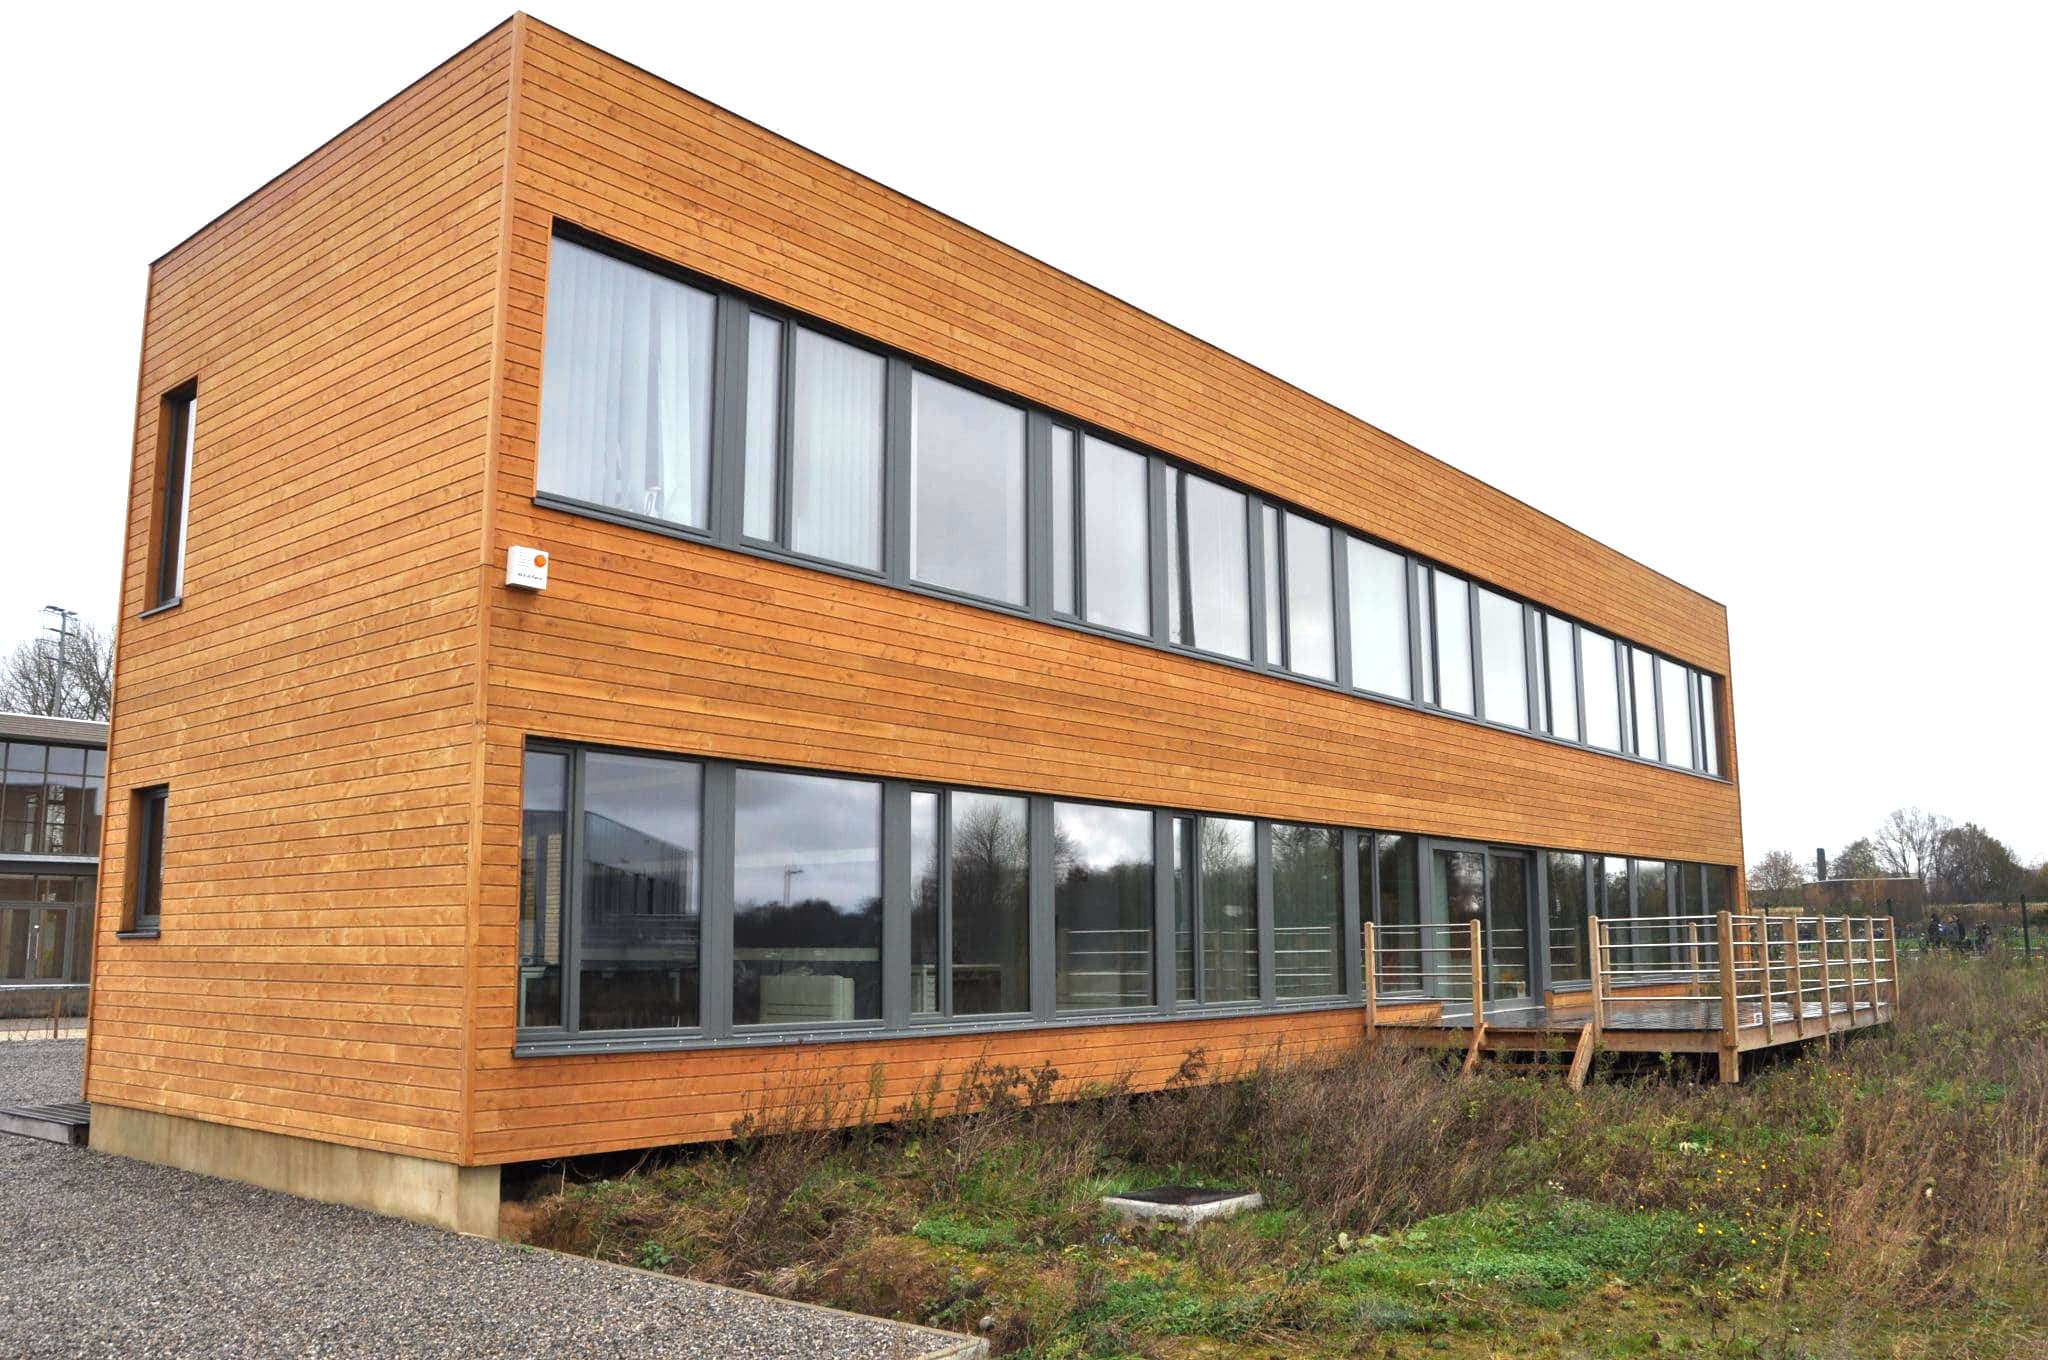 SI106 applied to wood cladding